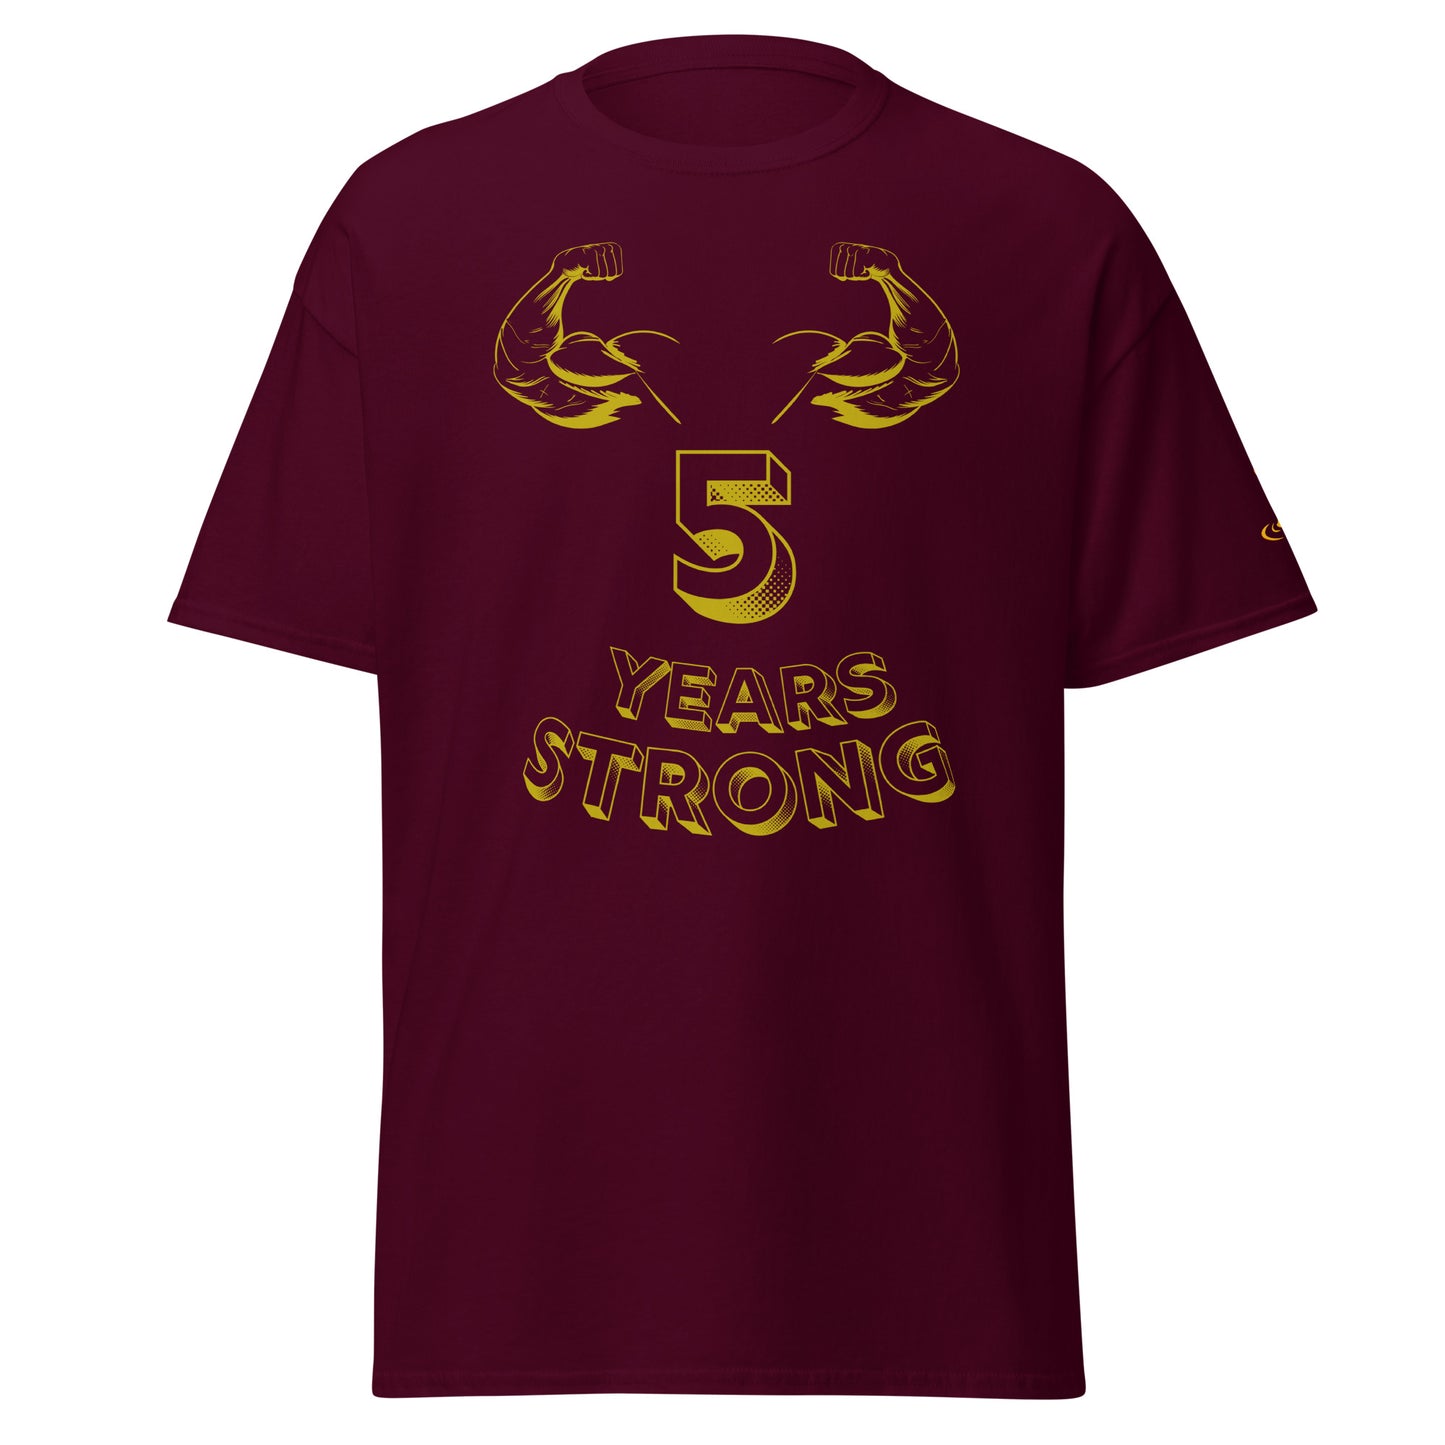 Men's classic tee 5 Years Strong